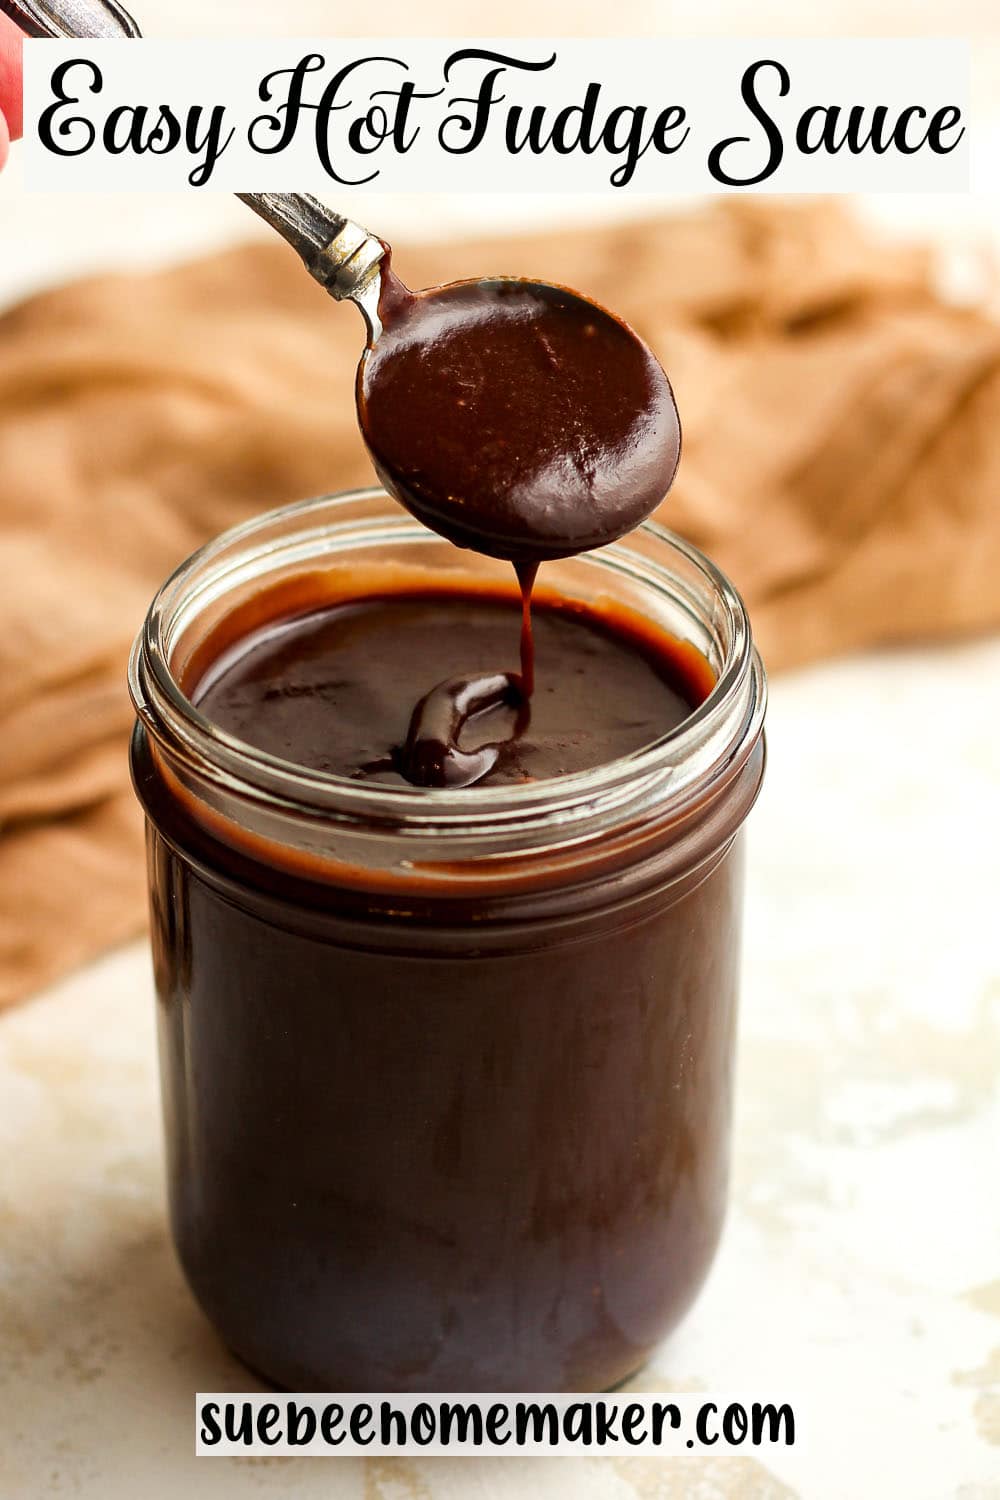 A jar of easy hot fudge sauce with a spoonful above the jar.